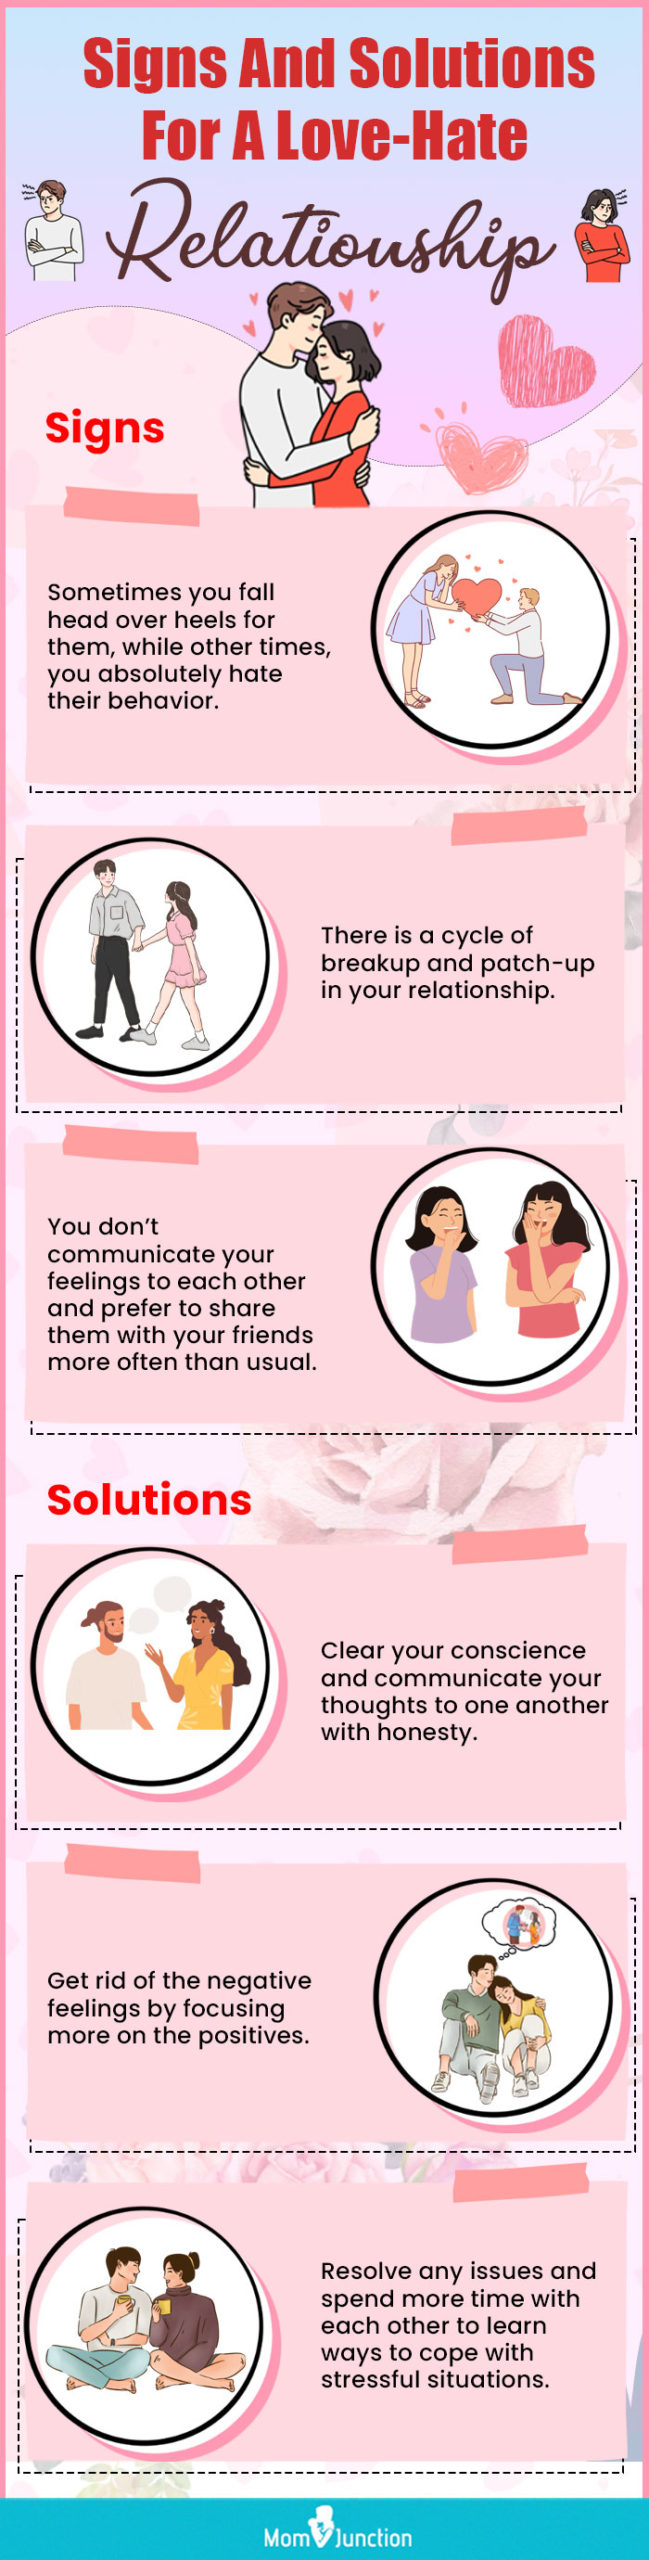 signs and solutions for a love hate relationship [infographic]